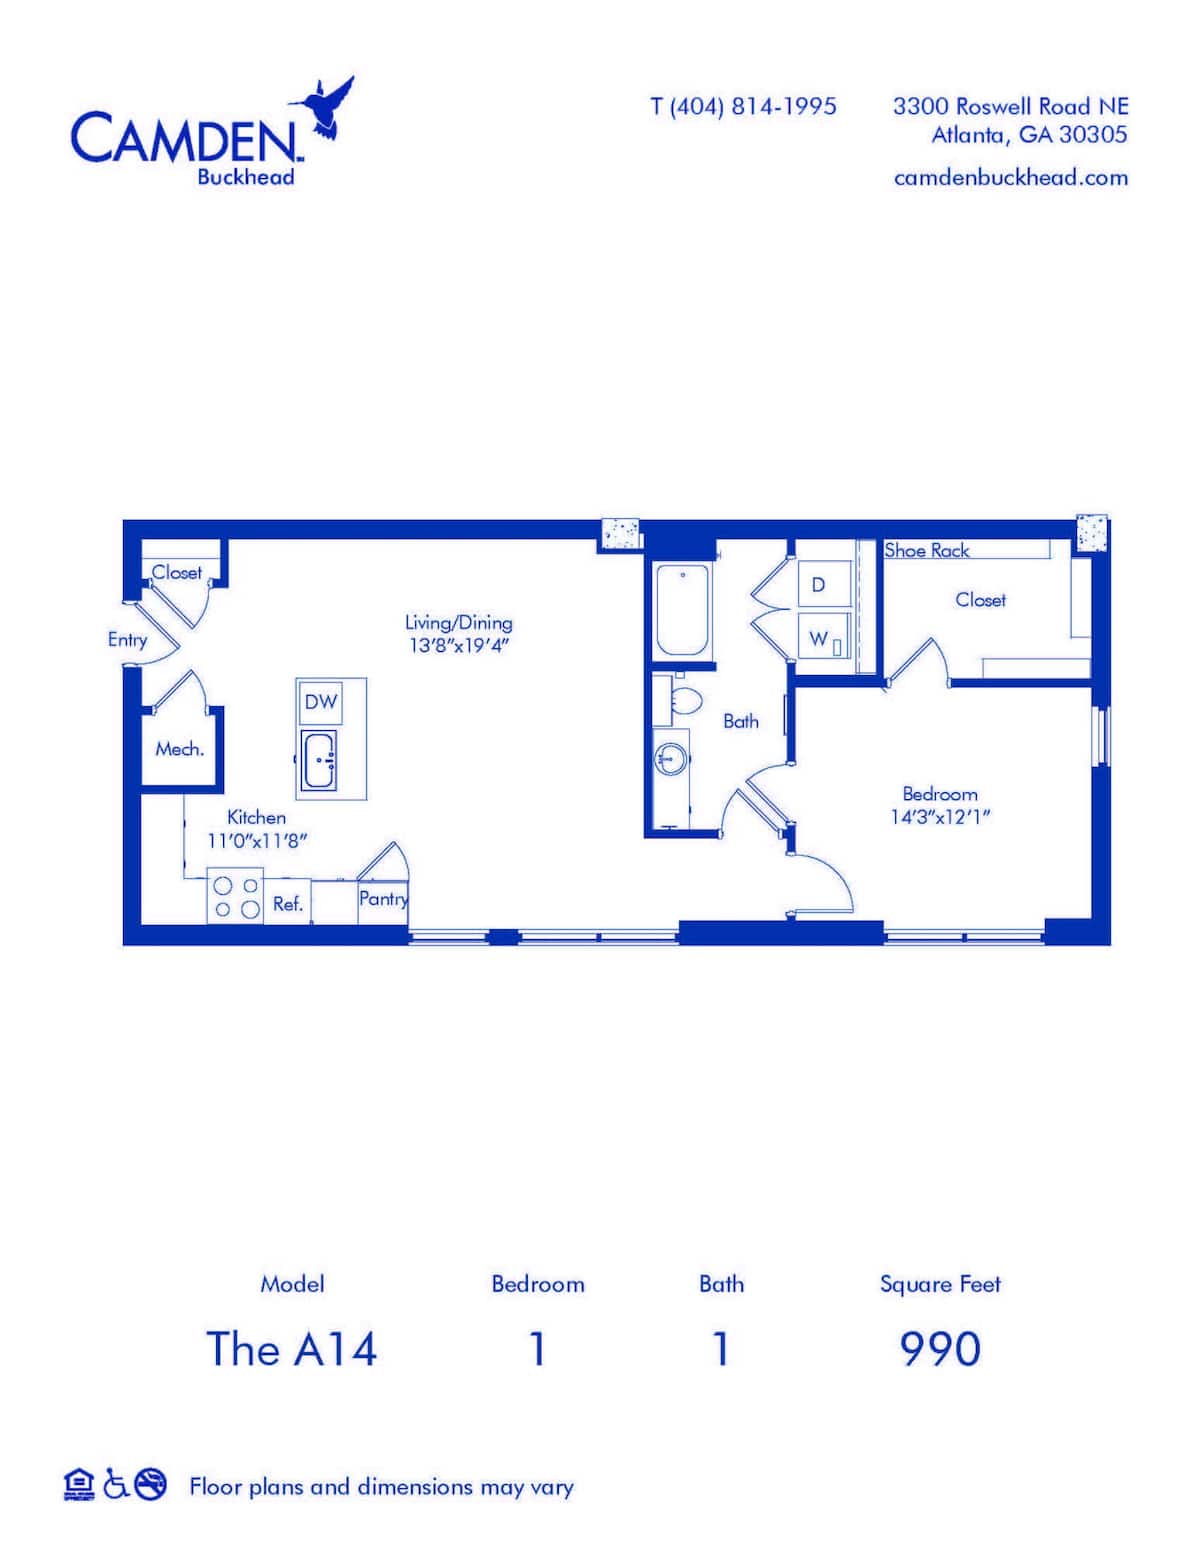 Floorplan diagram for The A14, showing 1 bedroom